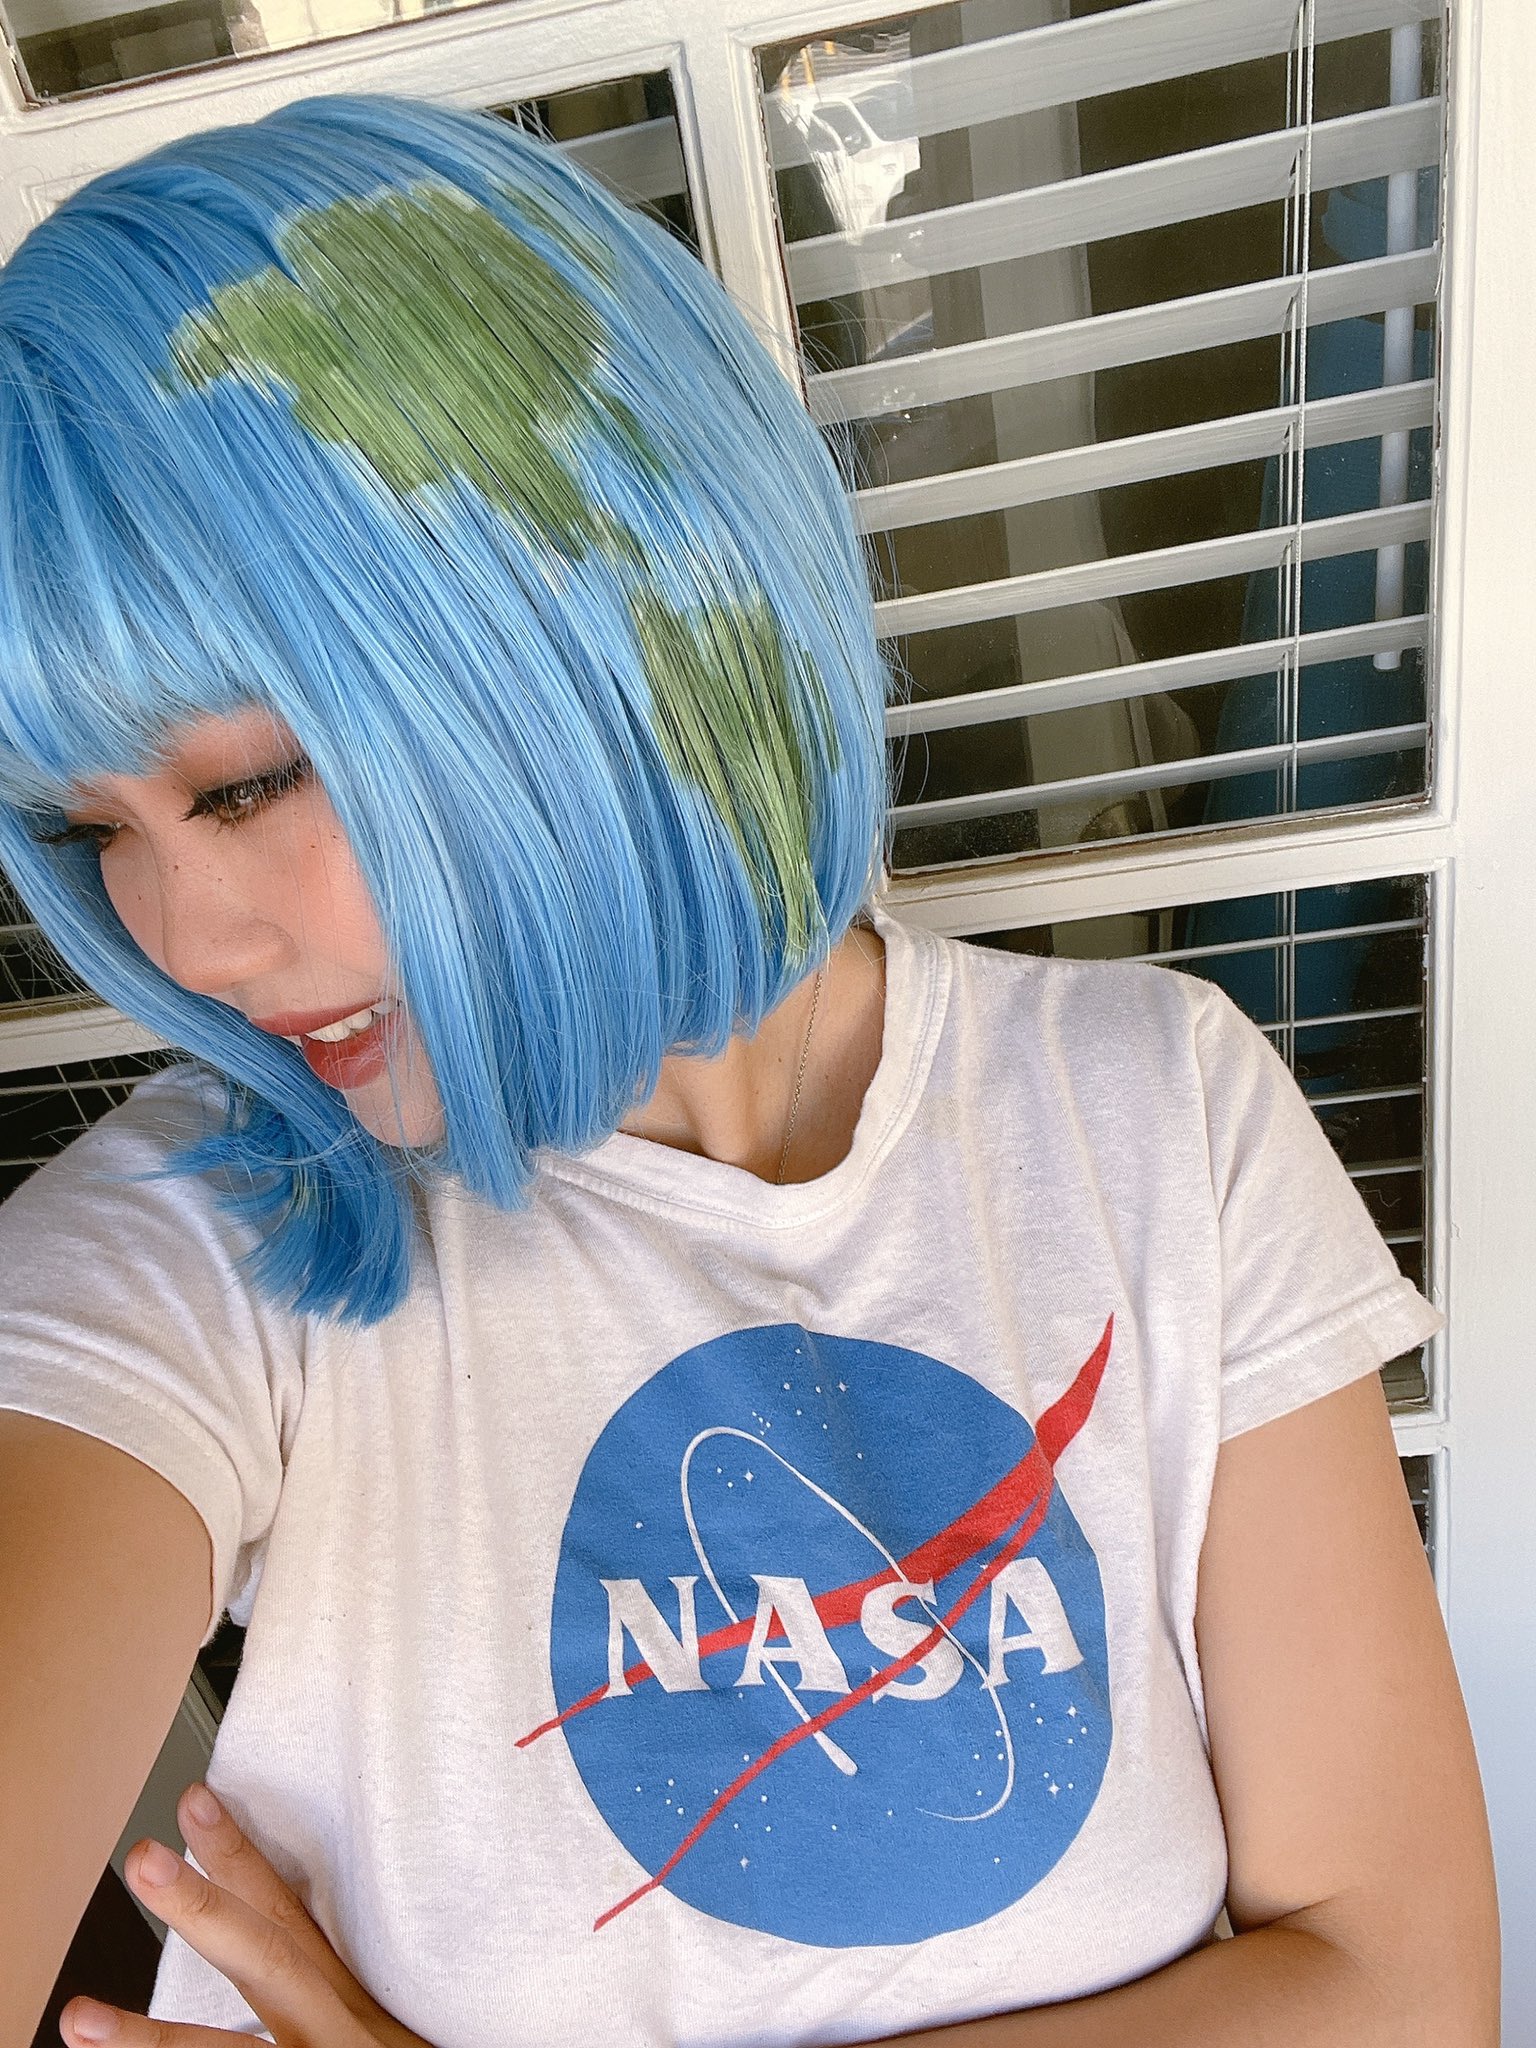 2 pic. My proudest thing I ever made for cosplay was this Earthchan wig, which I spent a really long